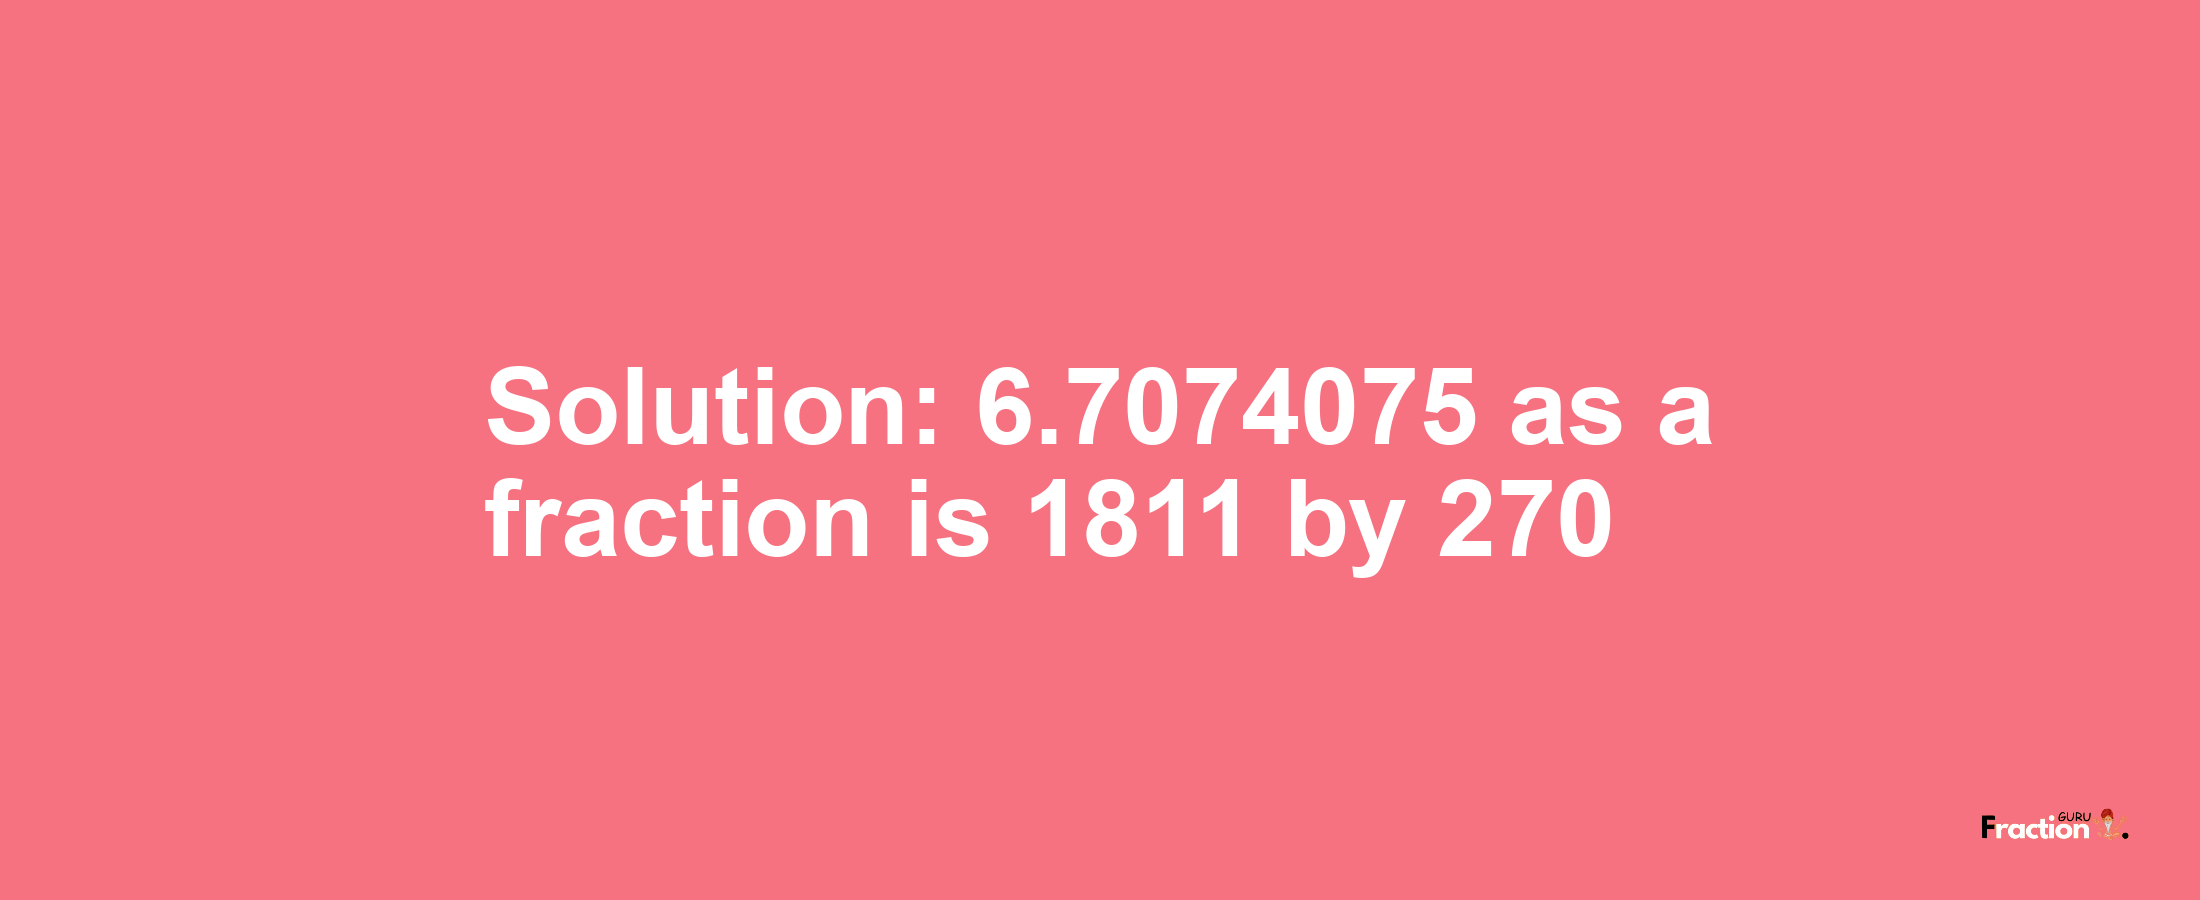 Solution:6.7074075 as a fraction is 1811/270